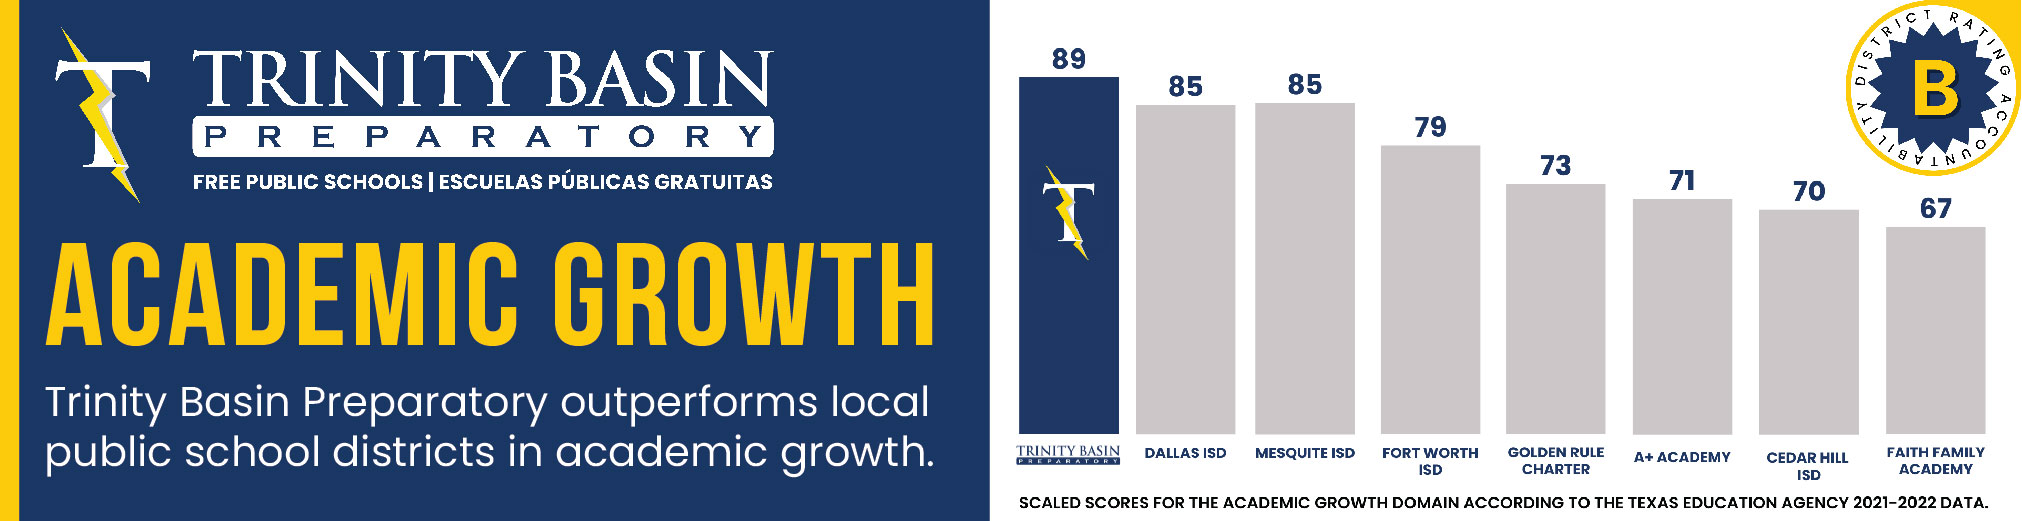 Trinity Basin Preparatory outperforms local public school districts in academic growth.